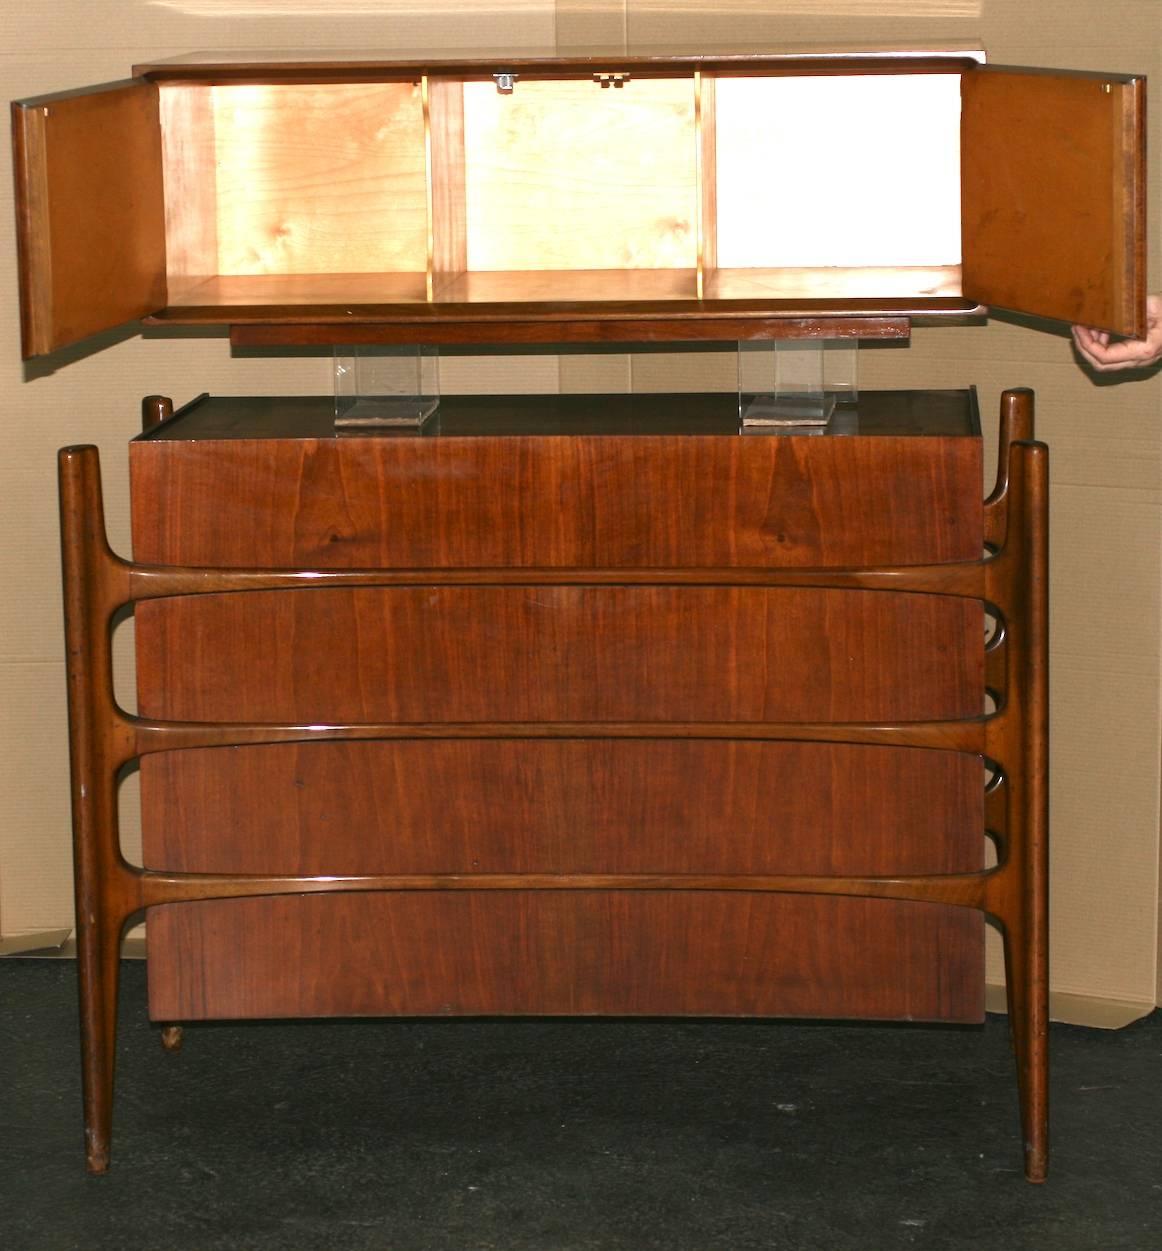 Cool, sculptural Swedish walnut four-drawer dresser with wall mount cabinet (three compartments) by William Hinn.
Amazing design with the curved dresser extending into pegged legs which protrude like organic struts supporting the drawers.